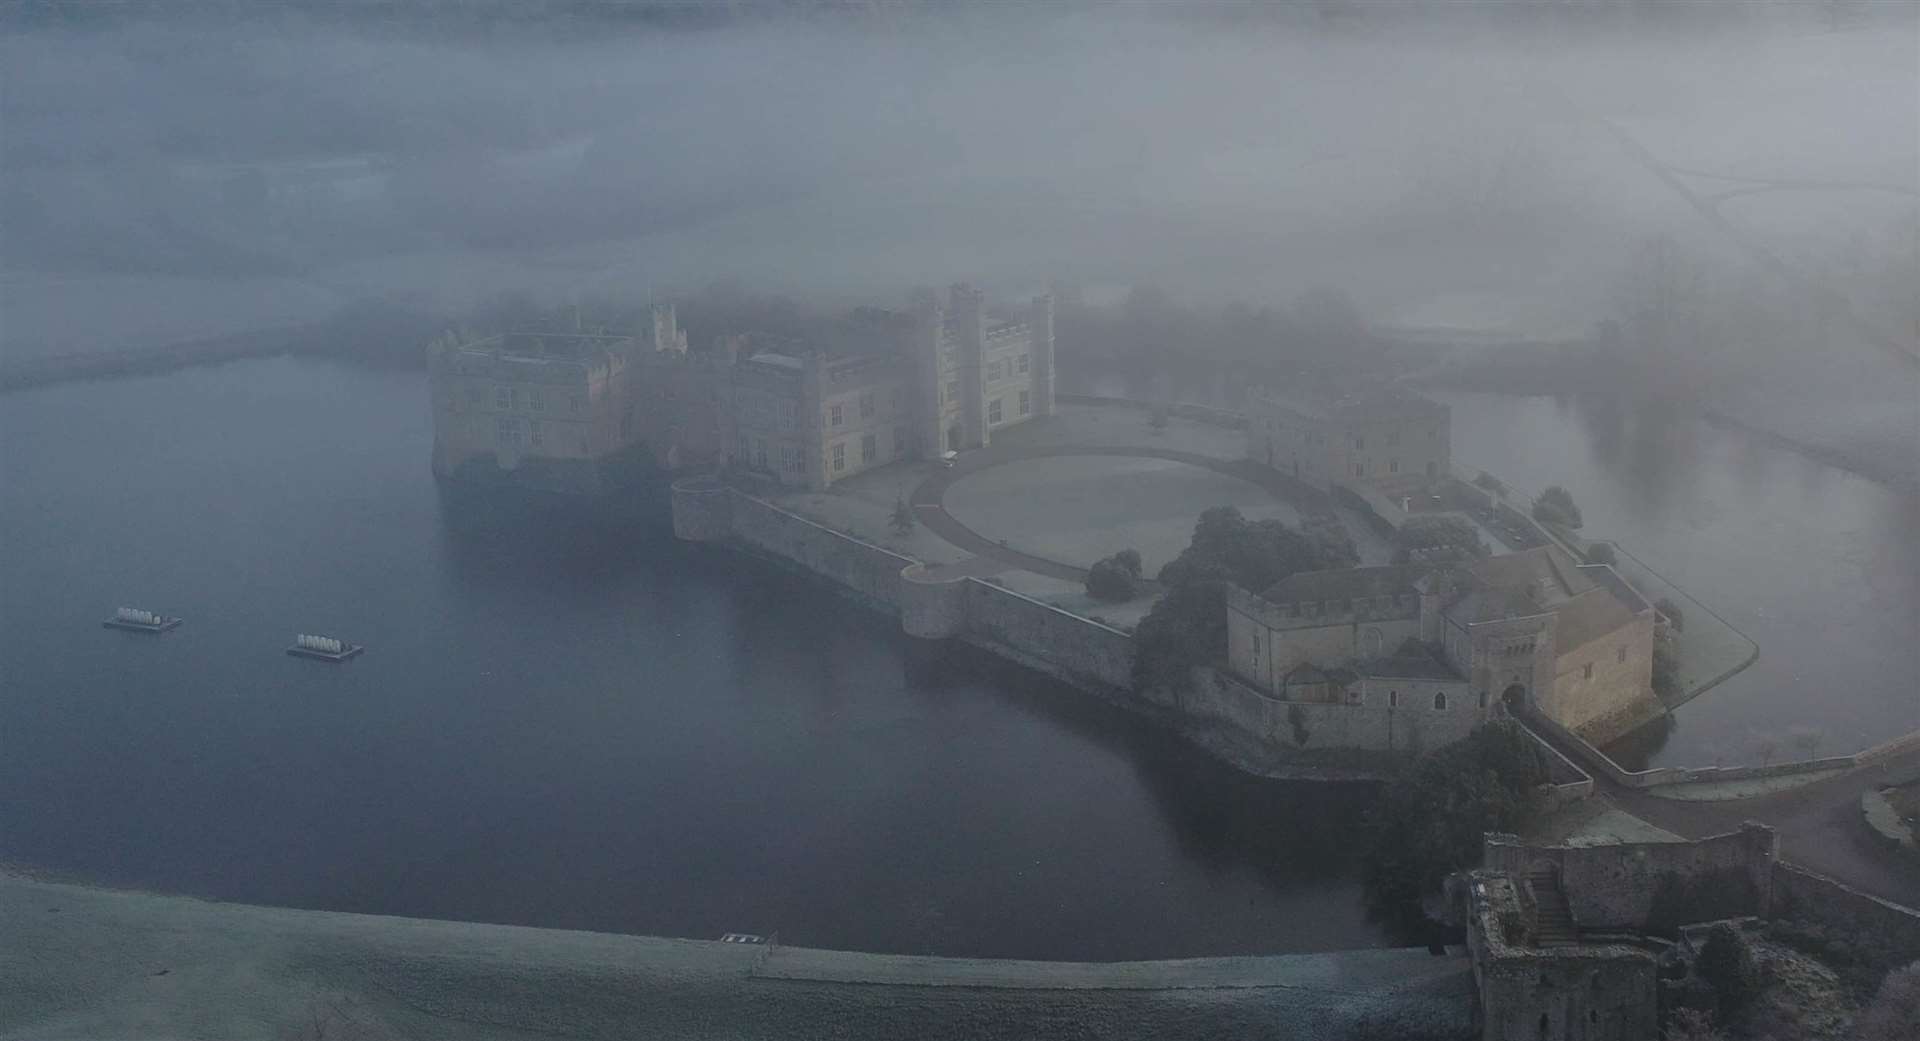 On one of the coldest days so far this year, Leeds Castle in Broomfield near Maidstone was shrouded in fog. Photo: UKNIP